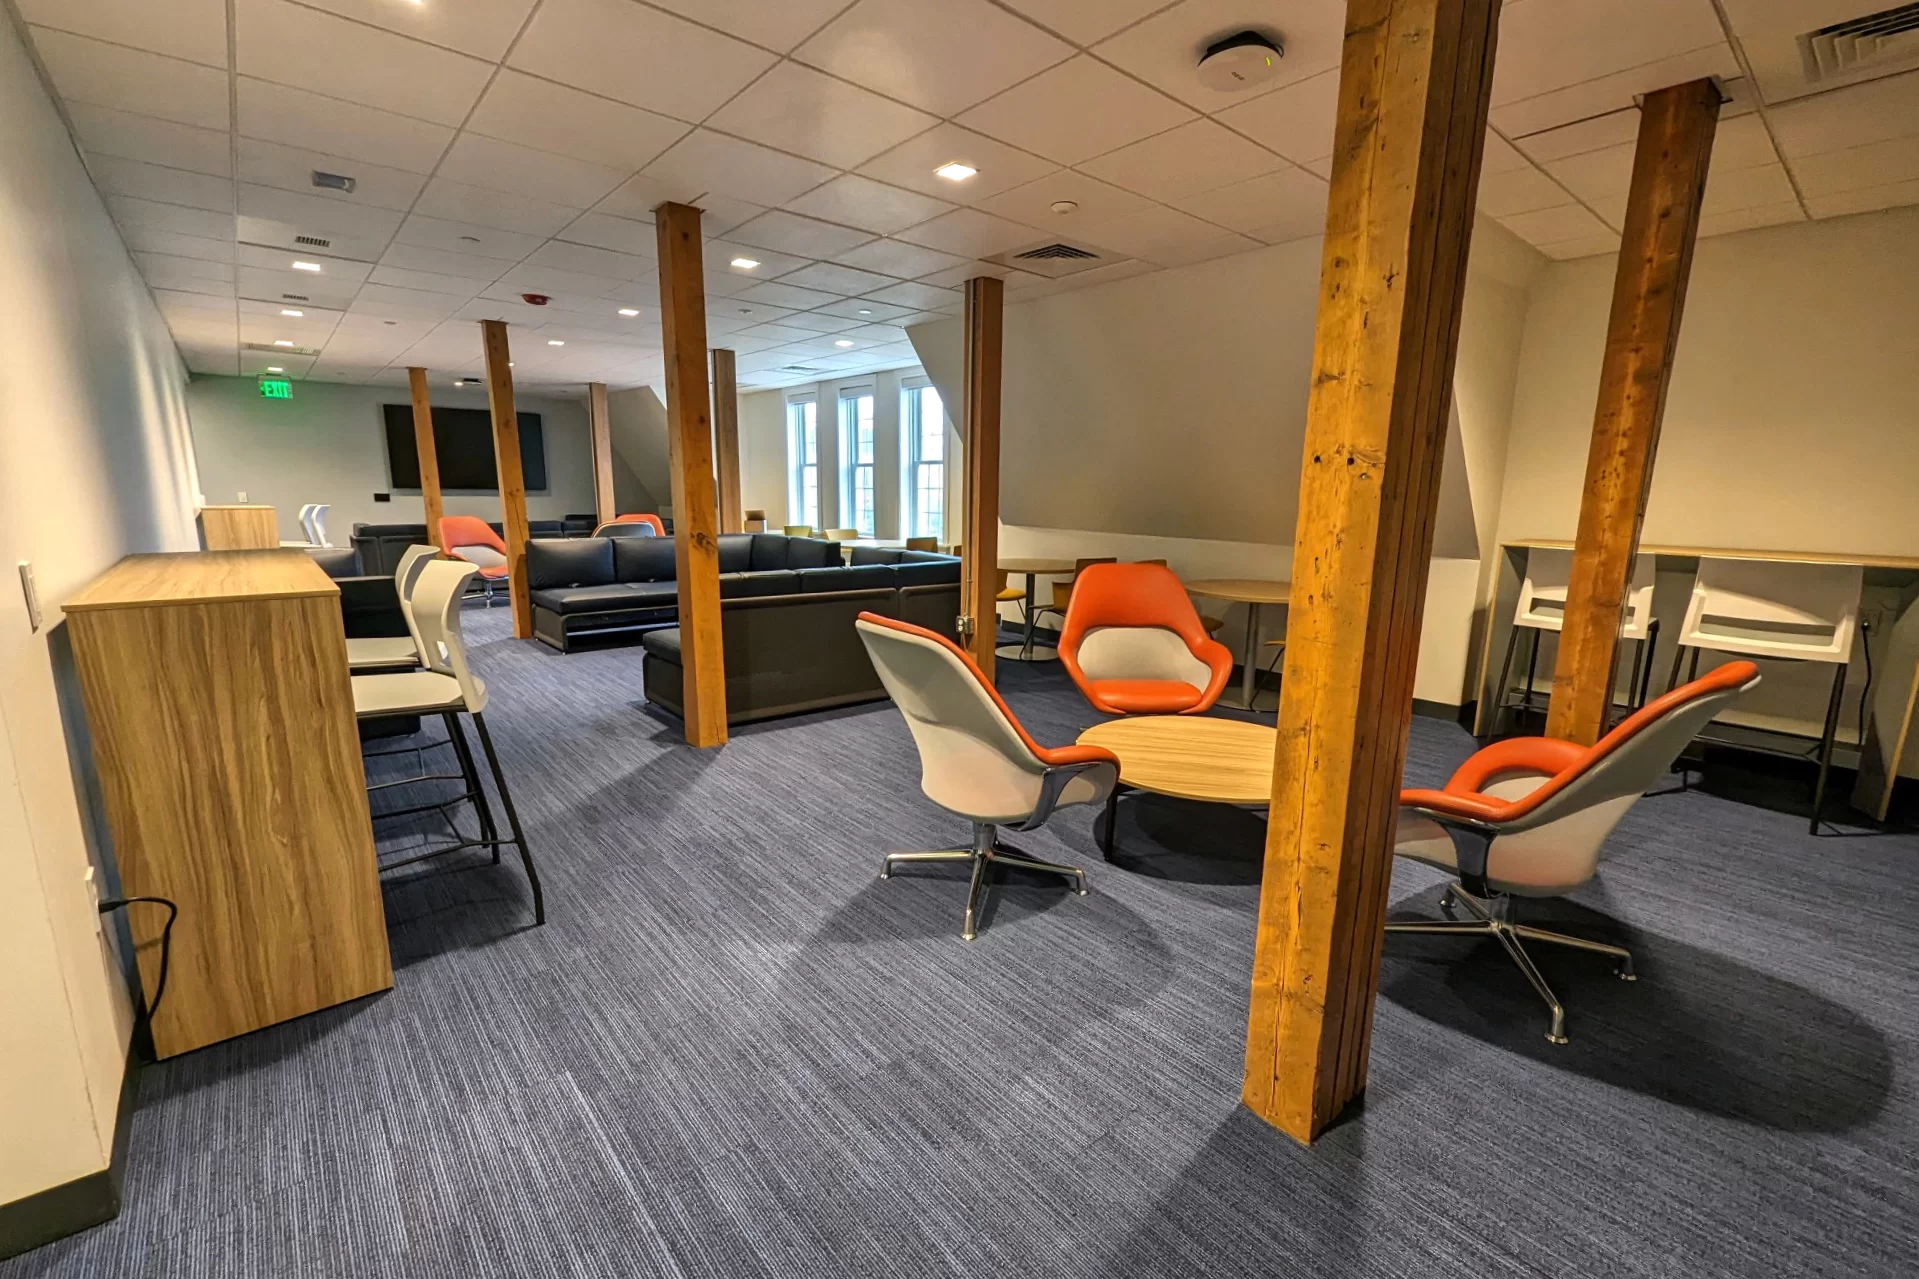 This second-floor lounge in Chase Hall is ready for use. (Kristi Mynhier/Bates College)